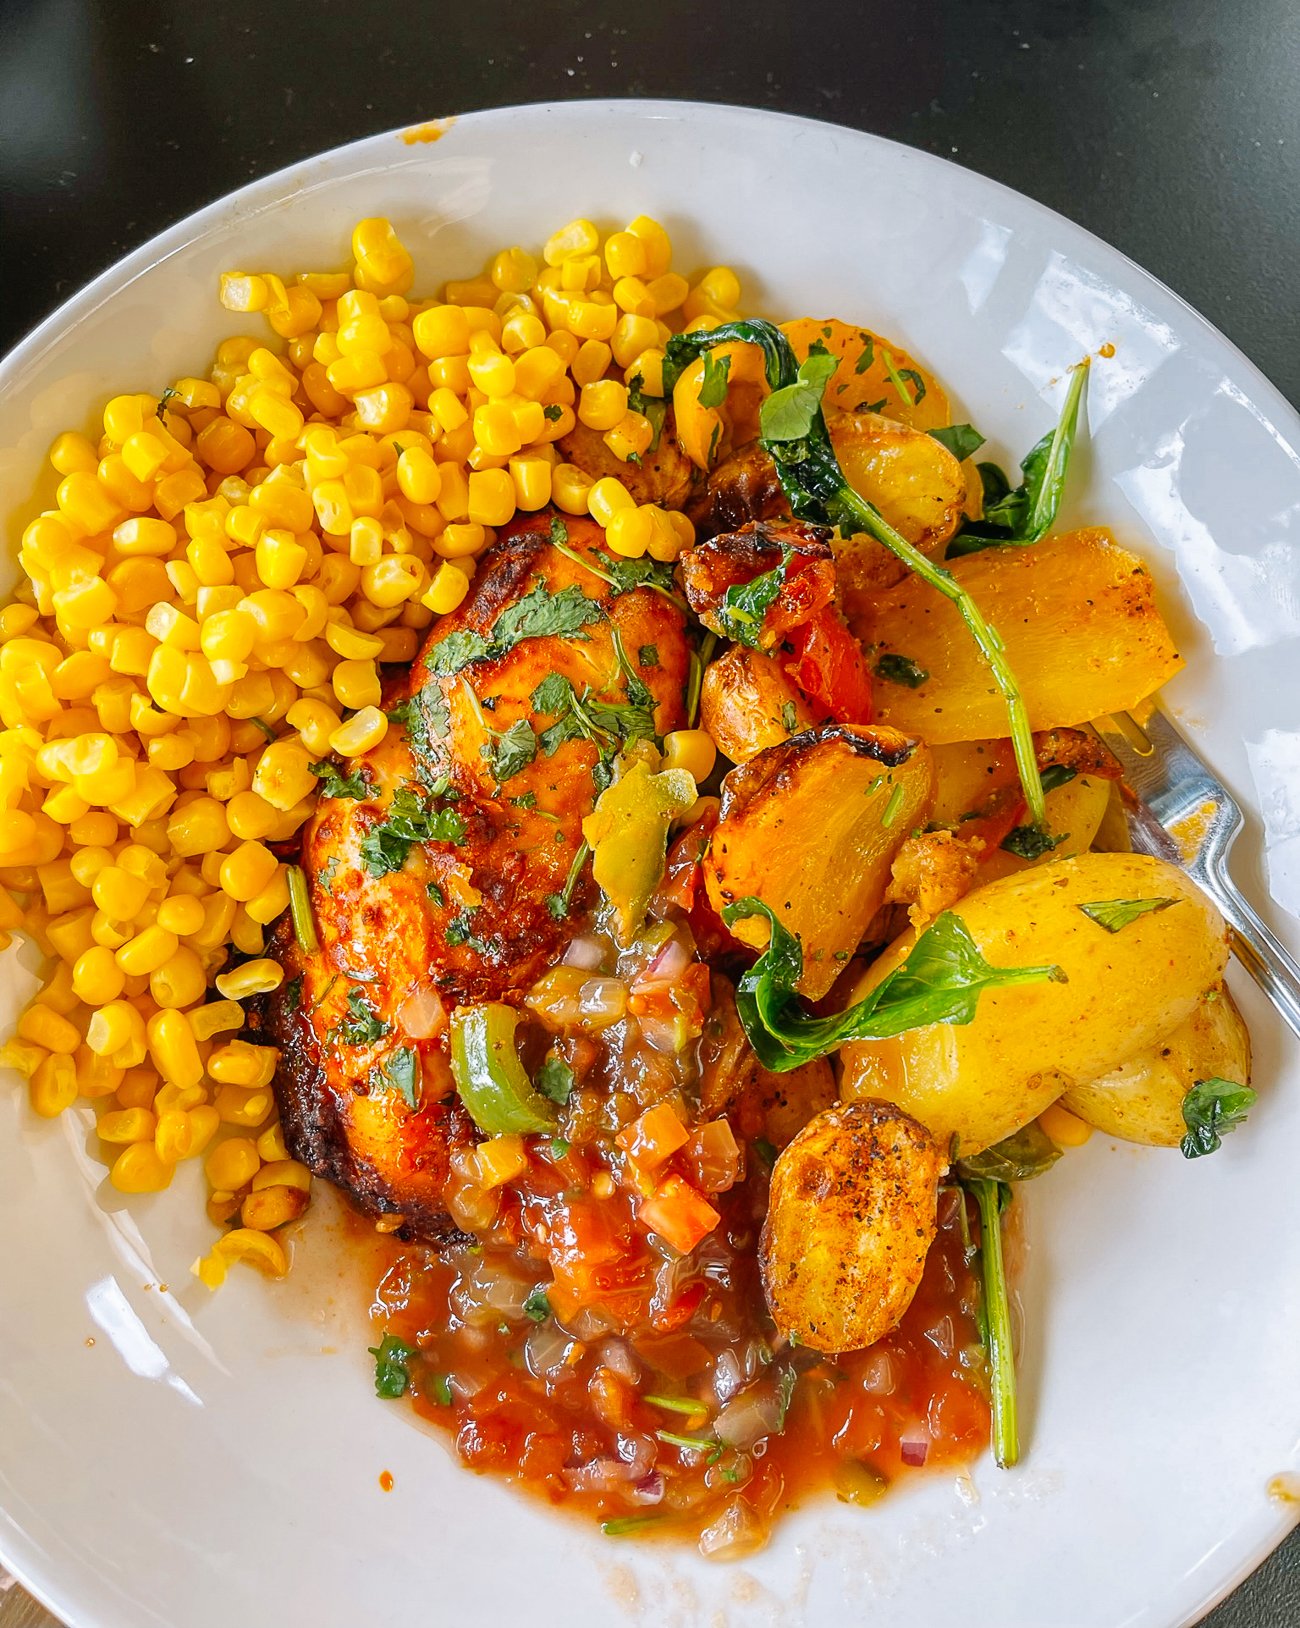 Chicken with salsa corn and potatoes at Saïd Business School